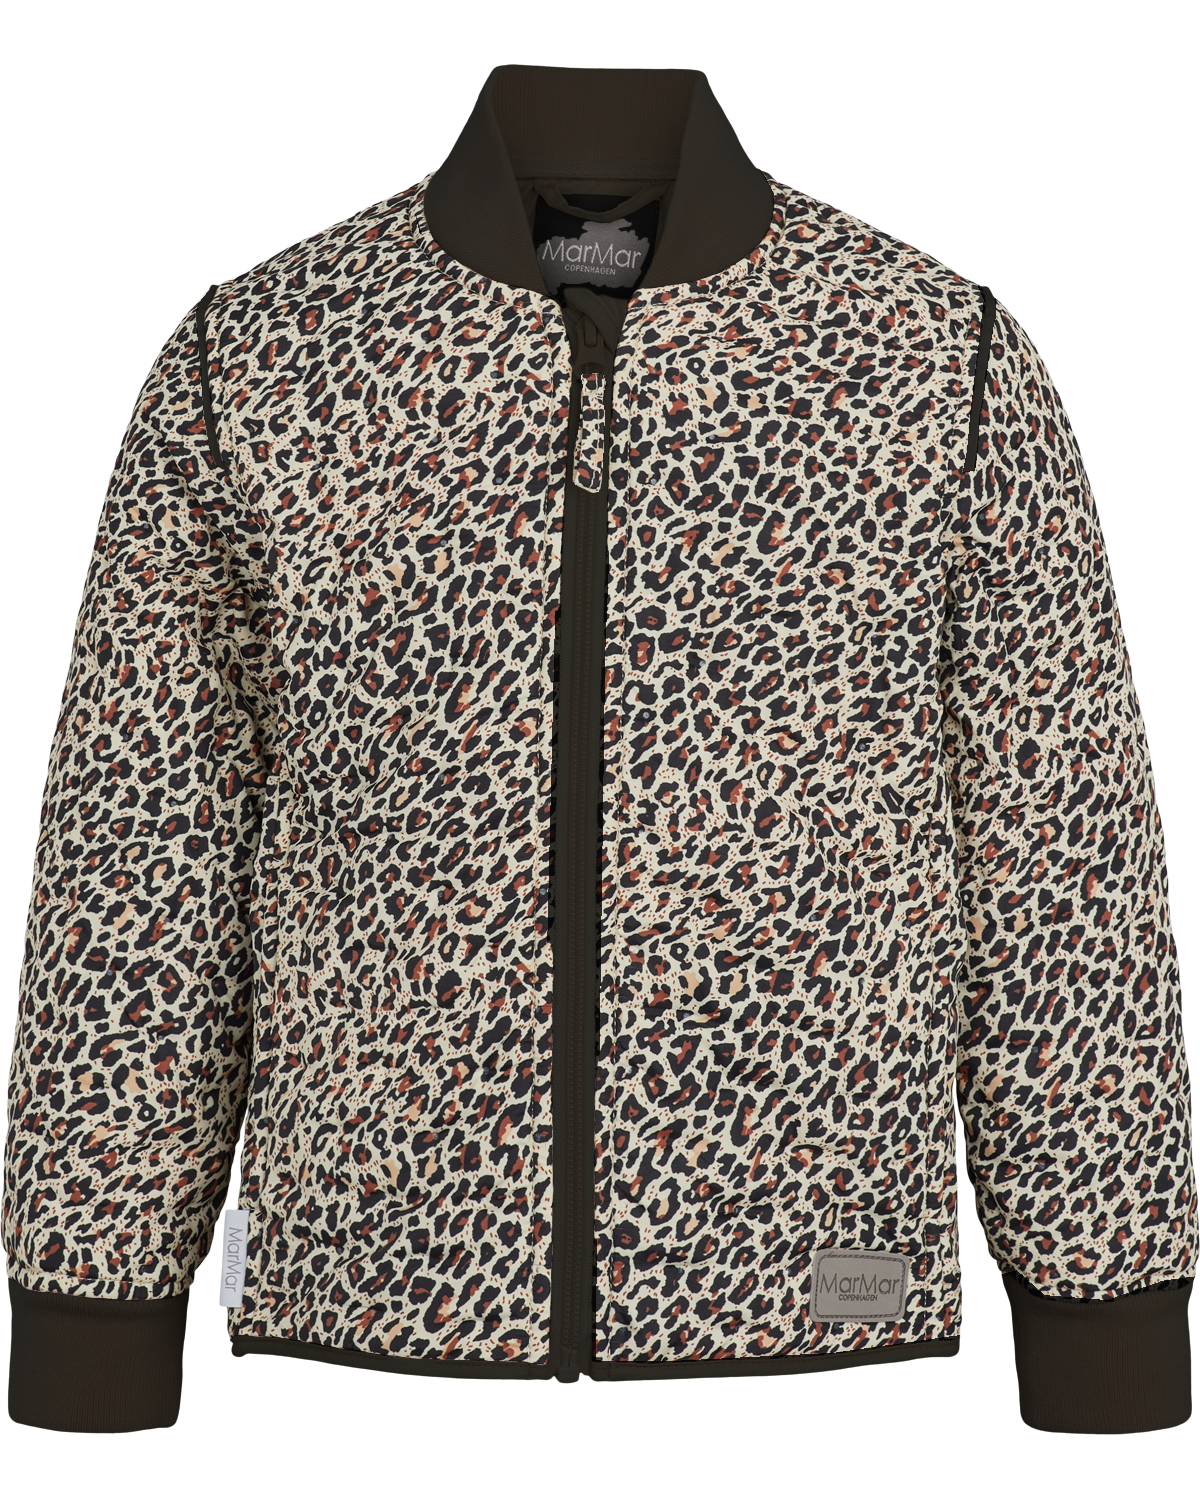 Orry Thermo Jacke – leopard